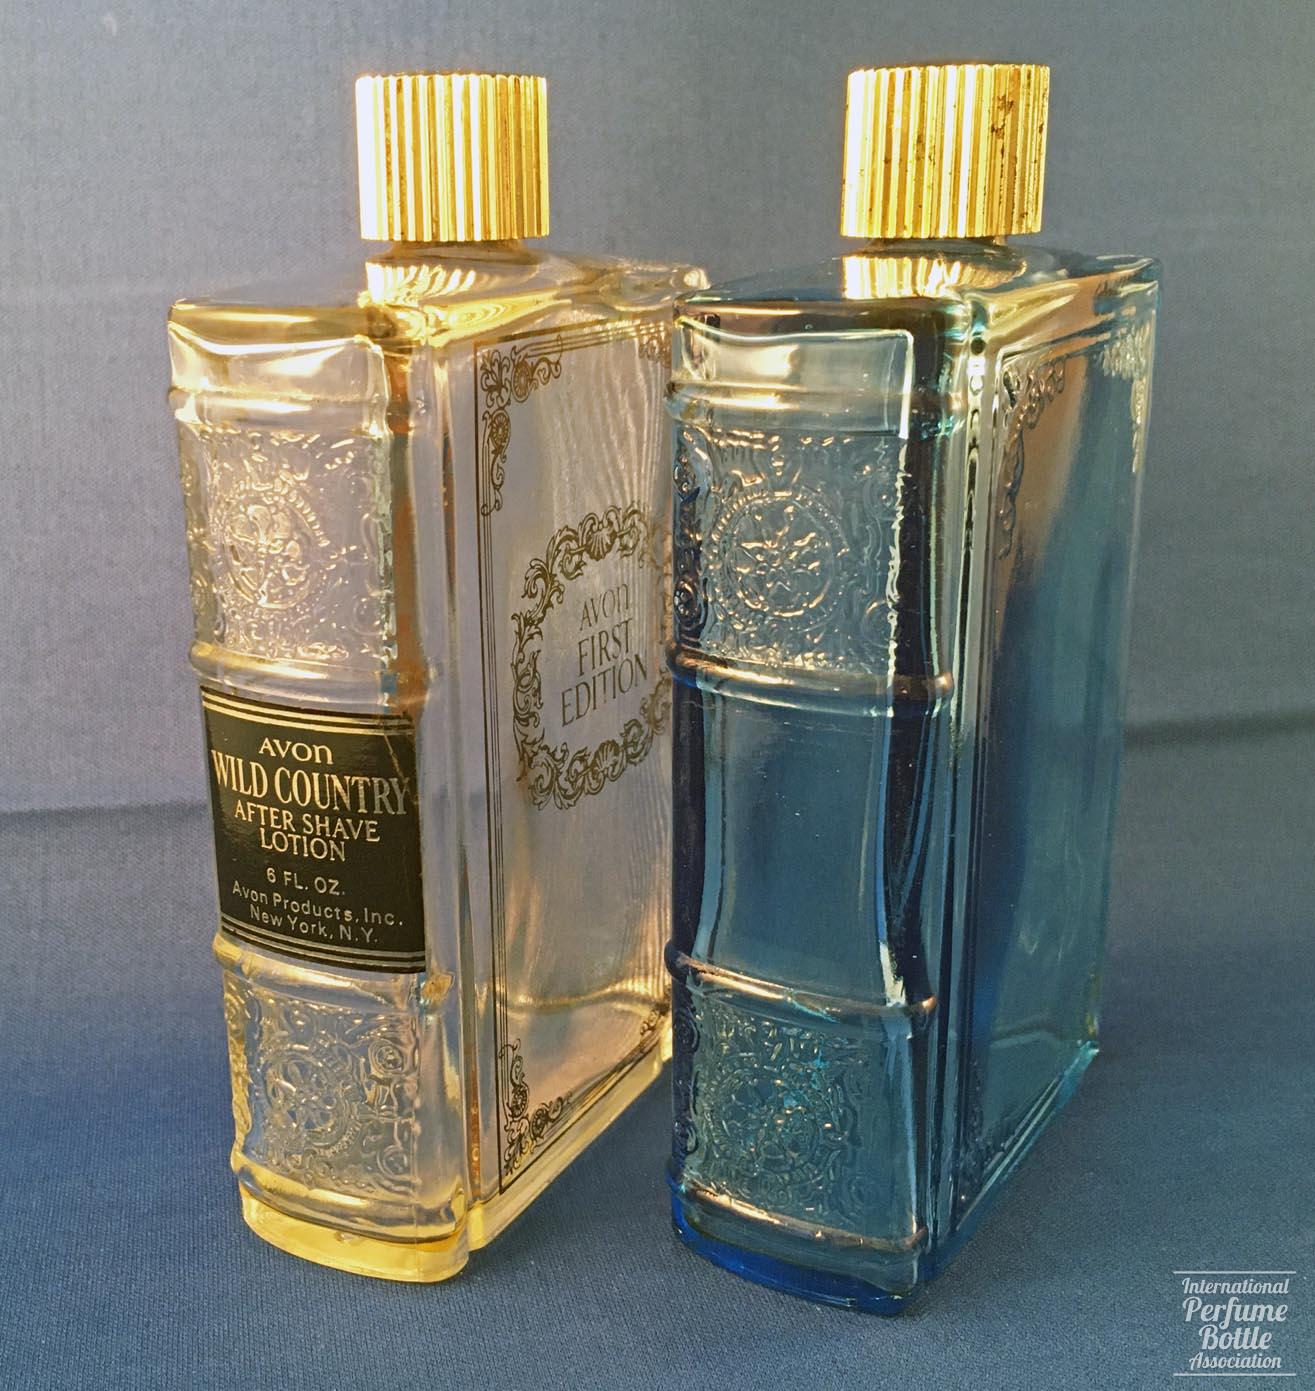 "First Edition" Book Bottles by Avon